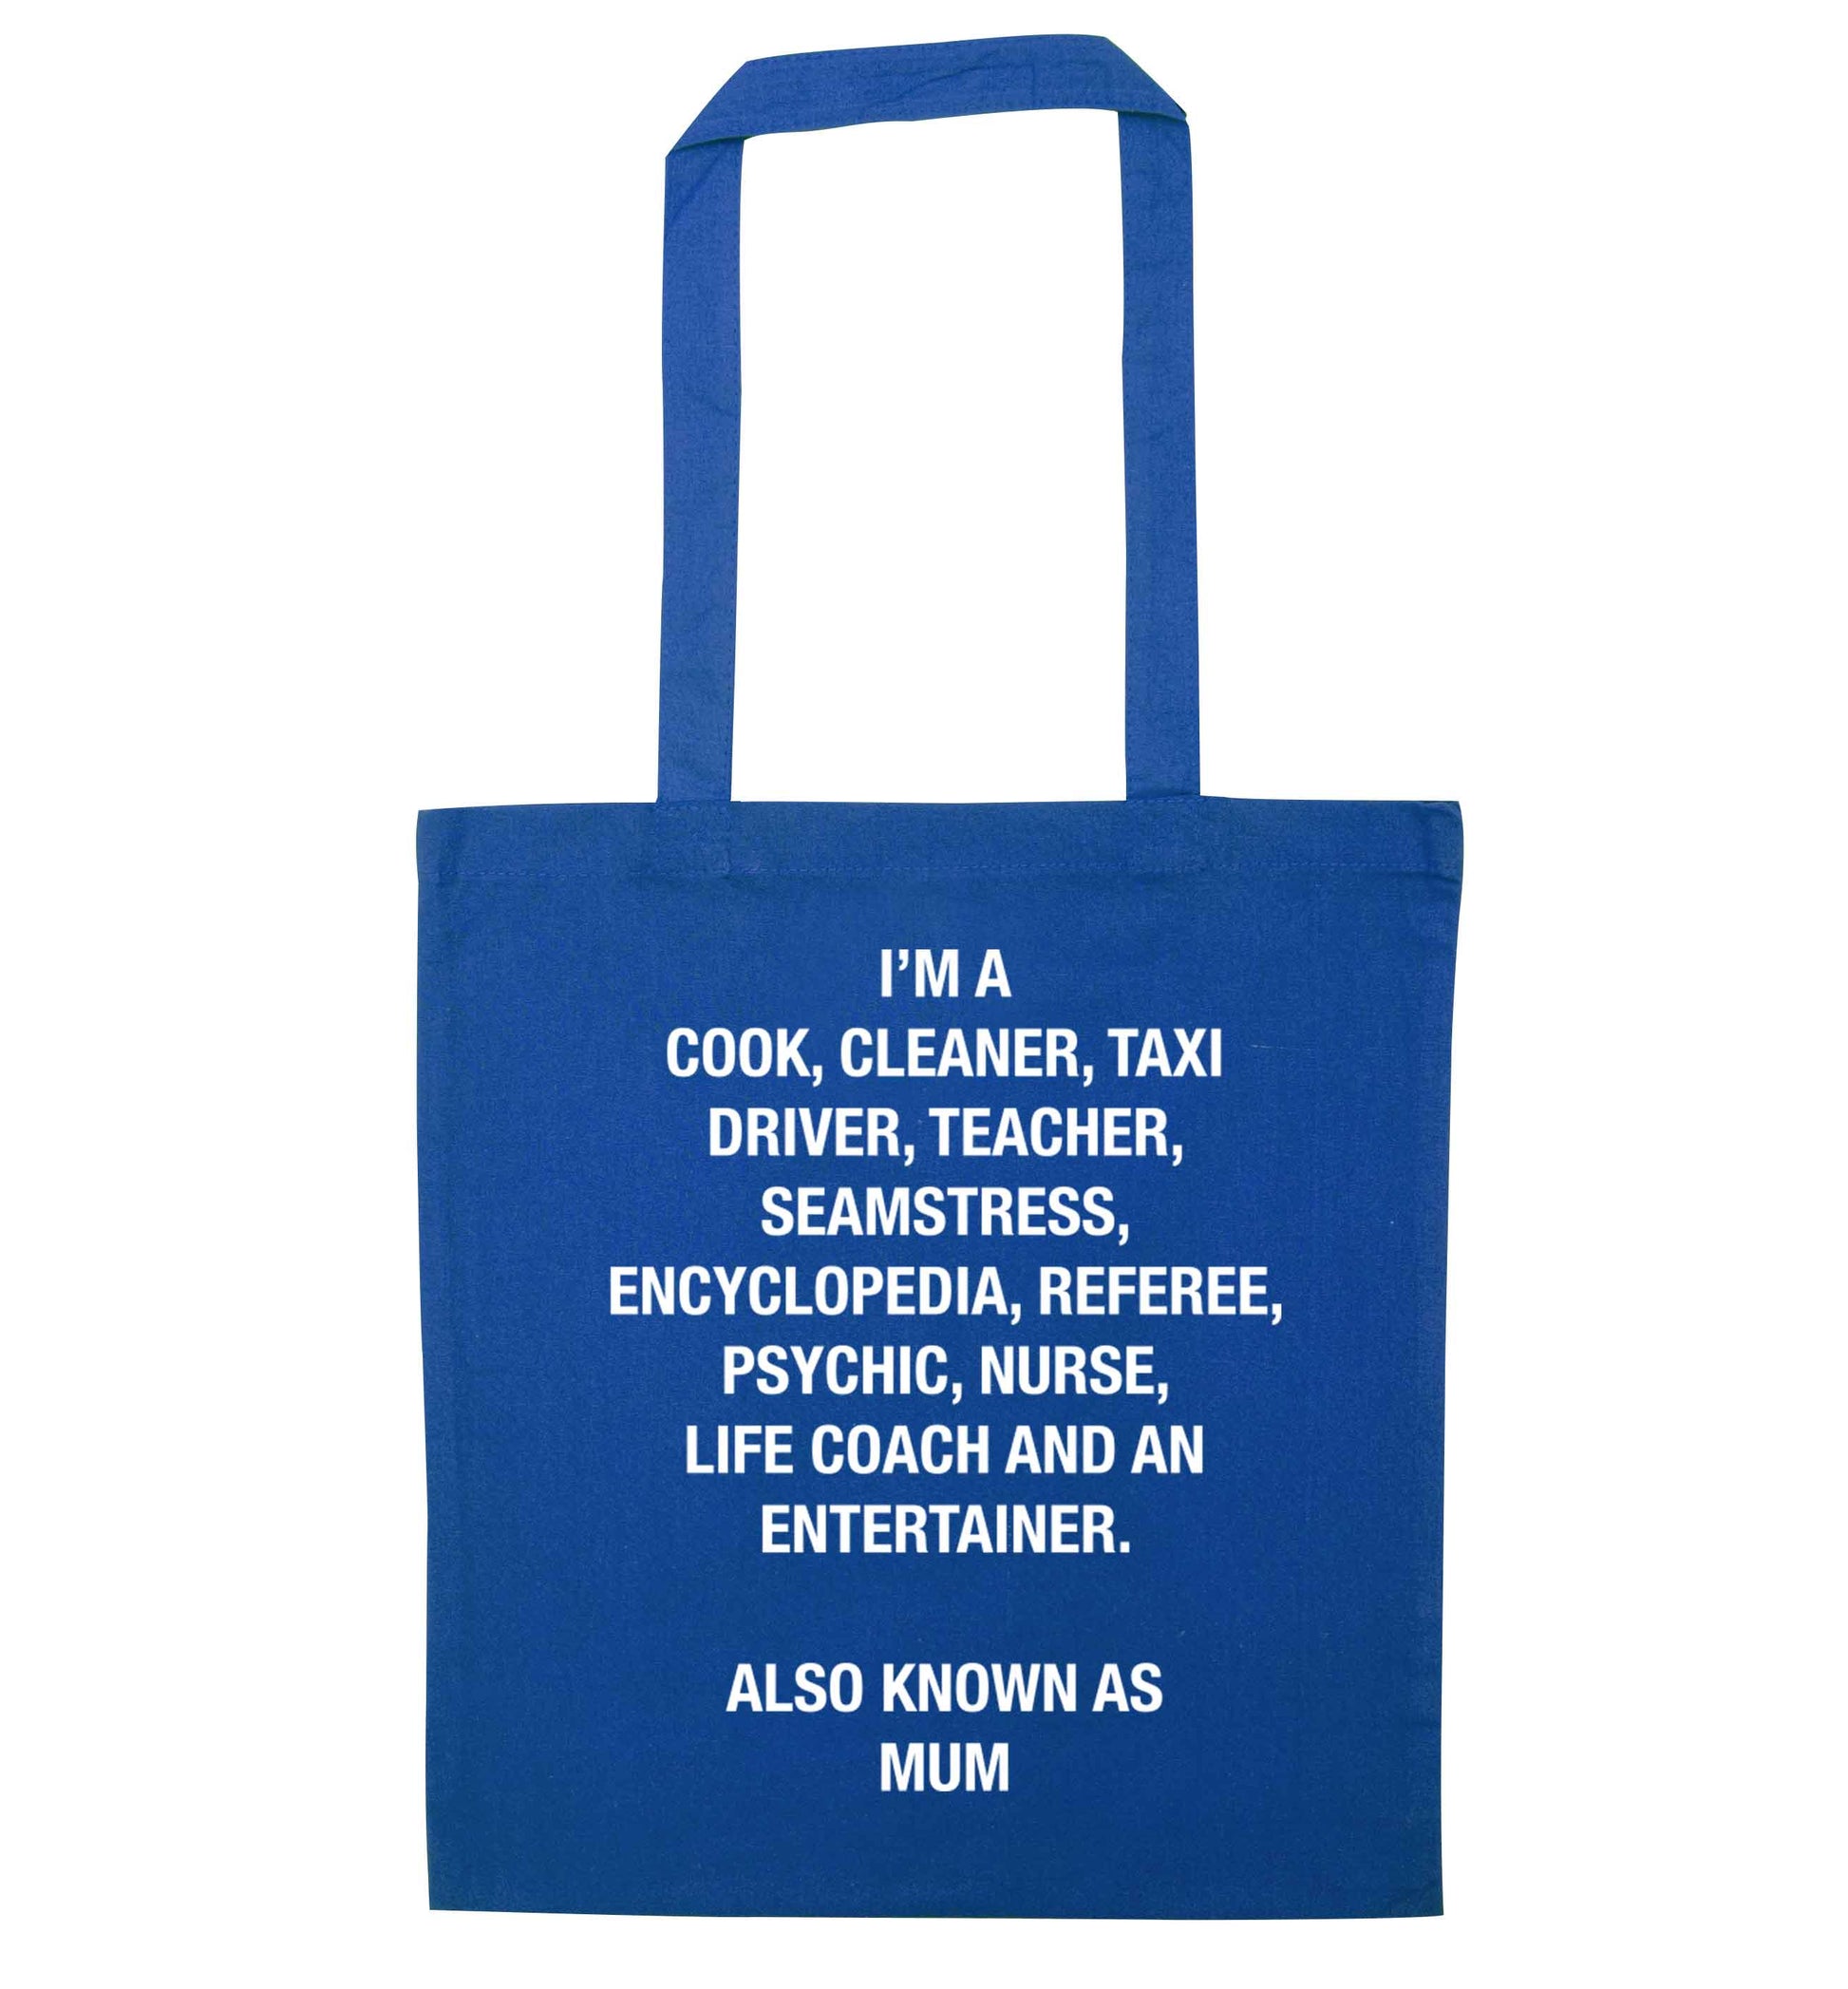 Funny gifts for your mum on mother's dayor her birthday! Mum, cook, cleaner, taxi driver, teacher, seamstress, encyclopedia, referee, psychic, nurse, life coach and entertainer blue tote bag